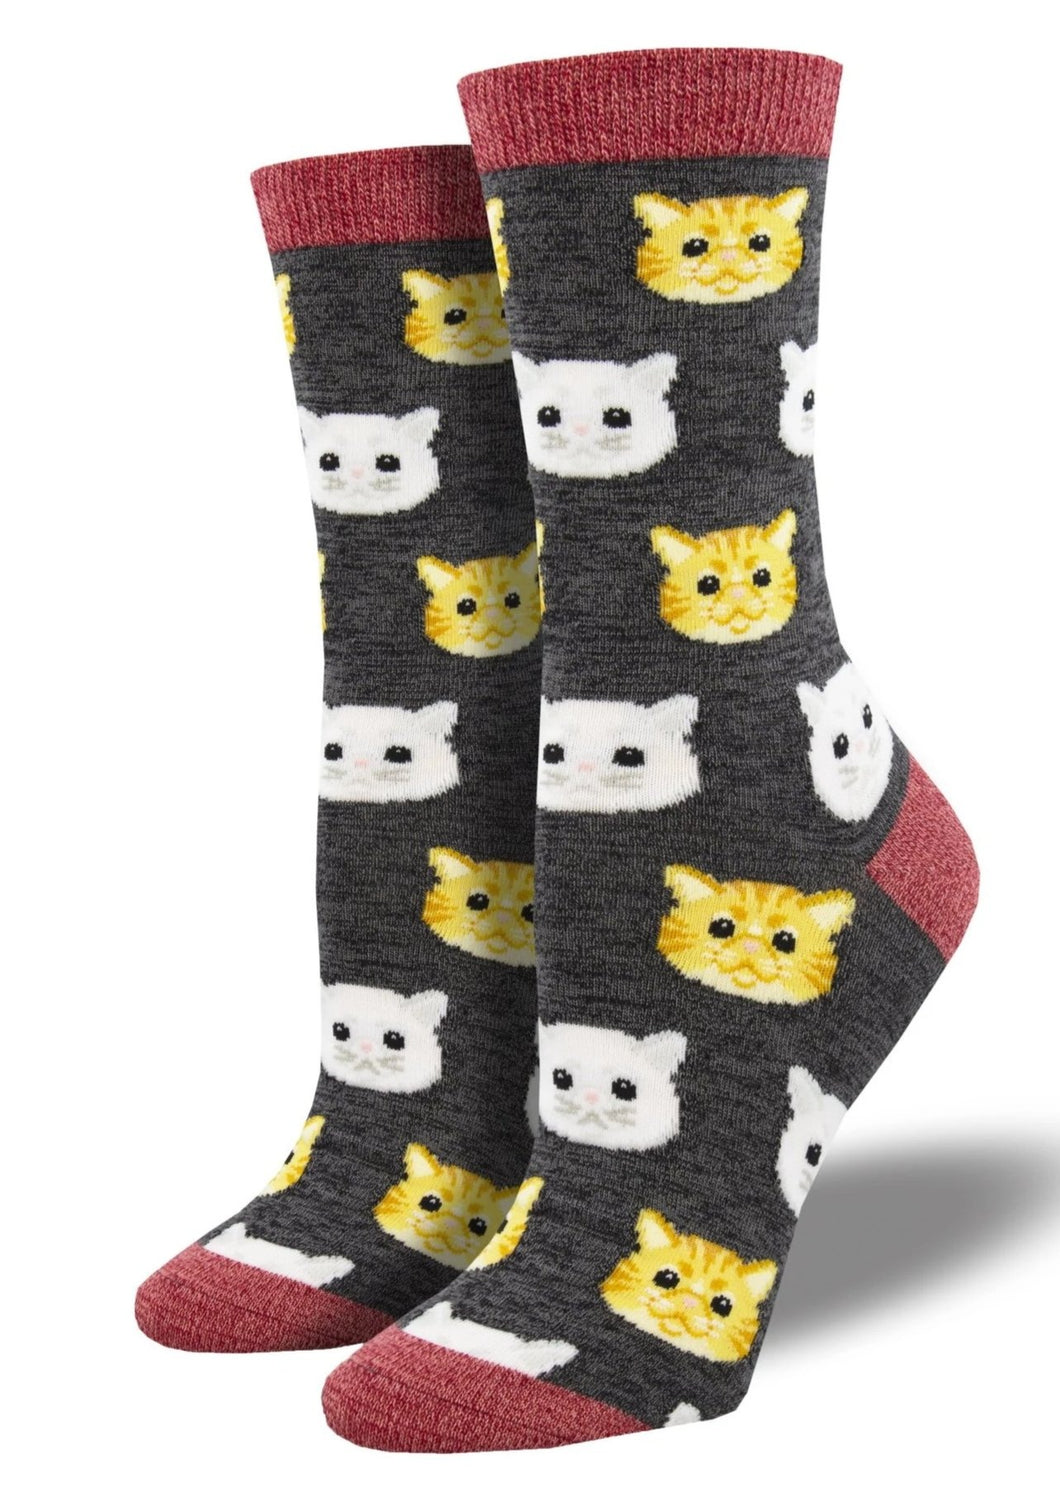 Heather Charcoal with Cat Faces. Soft, Breathable, Moisture Wicking, Antibacterial, Hypoallergenic, Amazing Socks! One Size Fits Most (Women's 5-11) Fabrication: 66% Rayon from Bamboo, 32% Nylon, 2% Spandex SockSmith $20.00